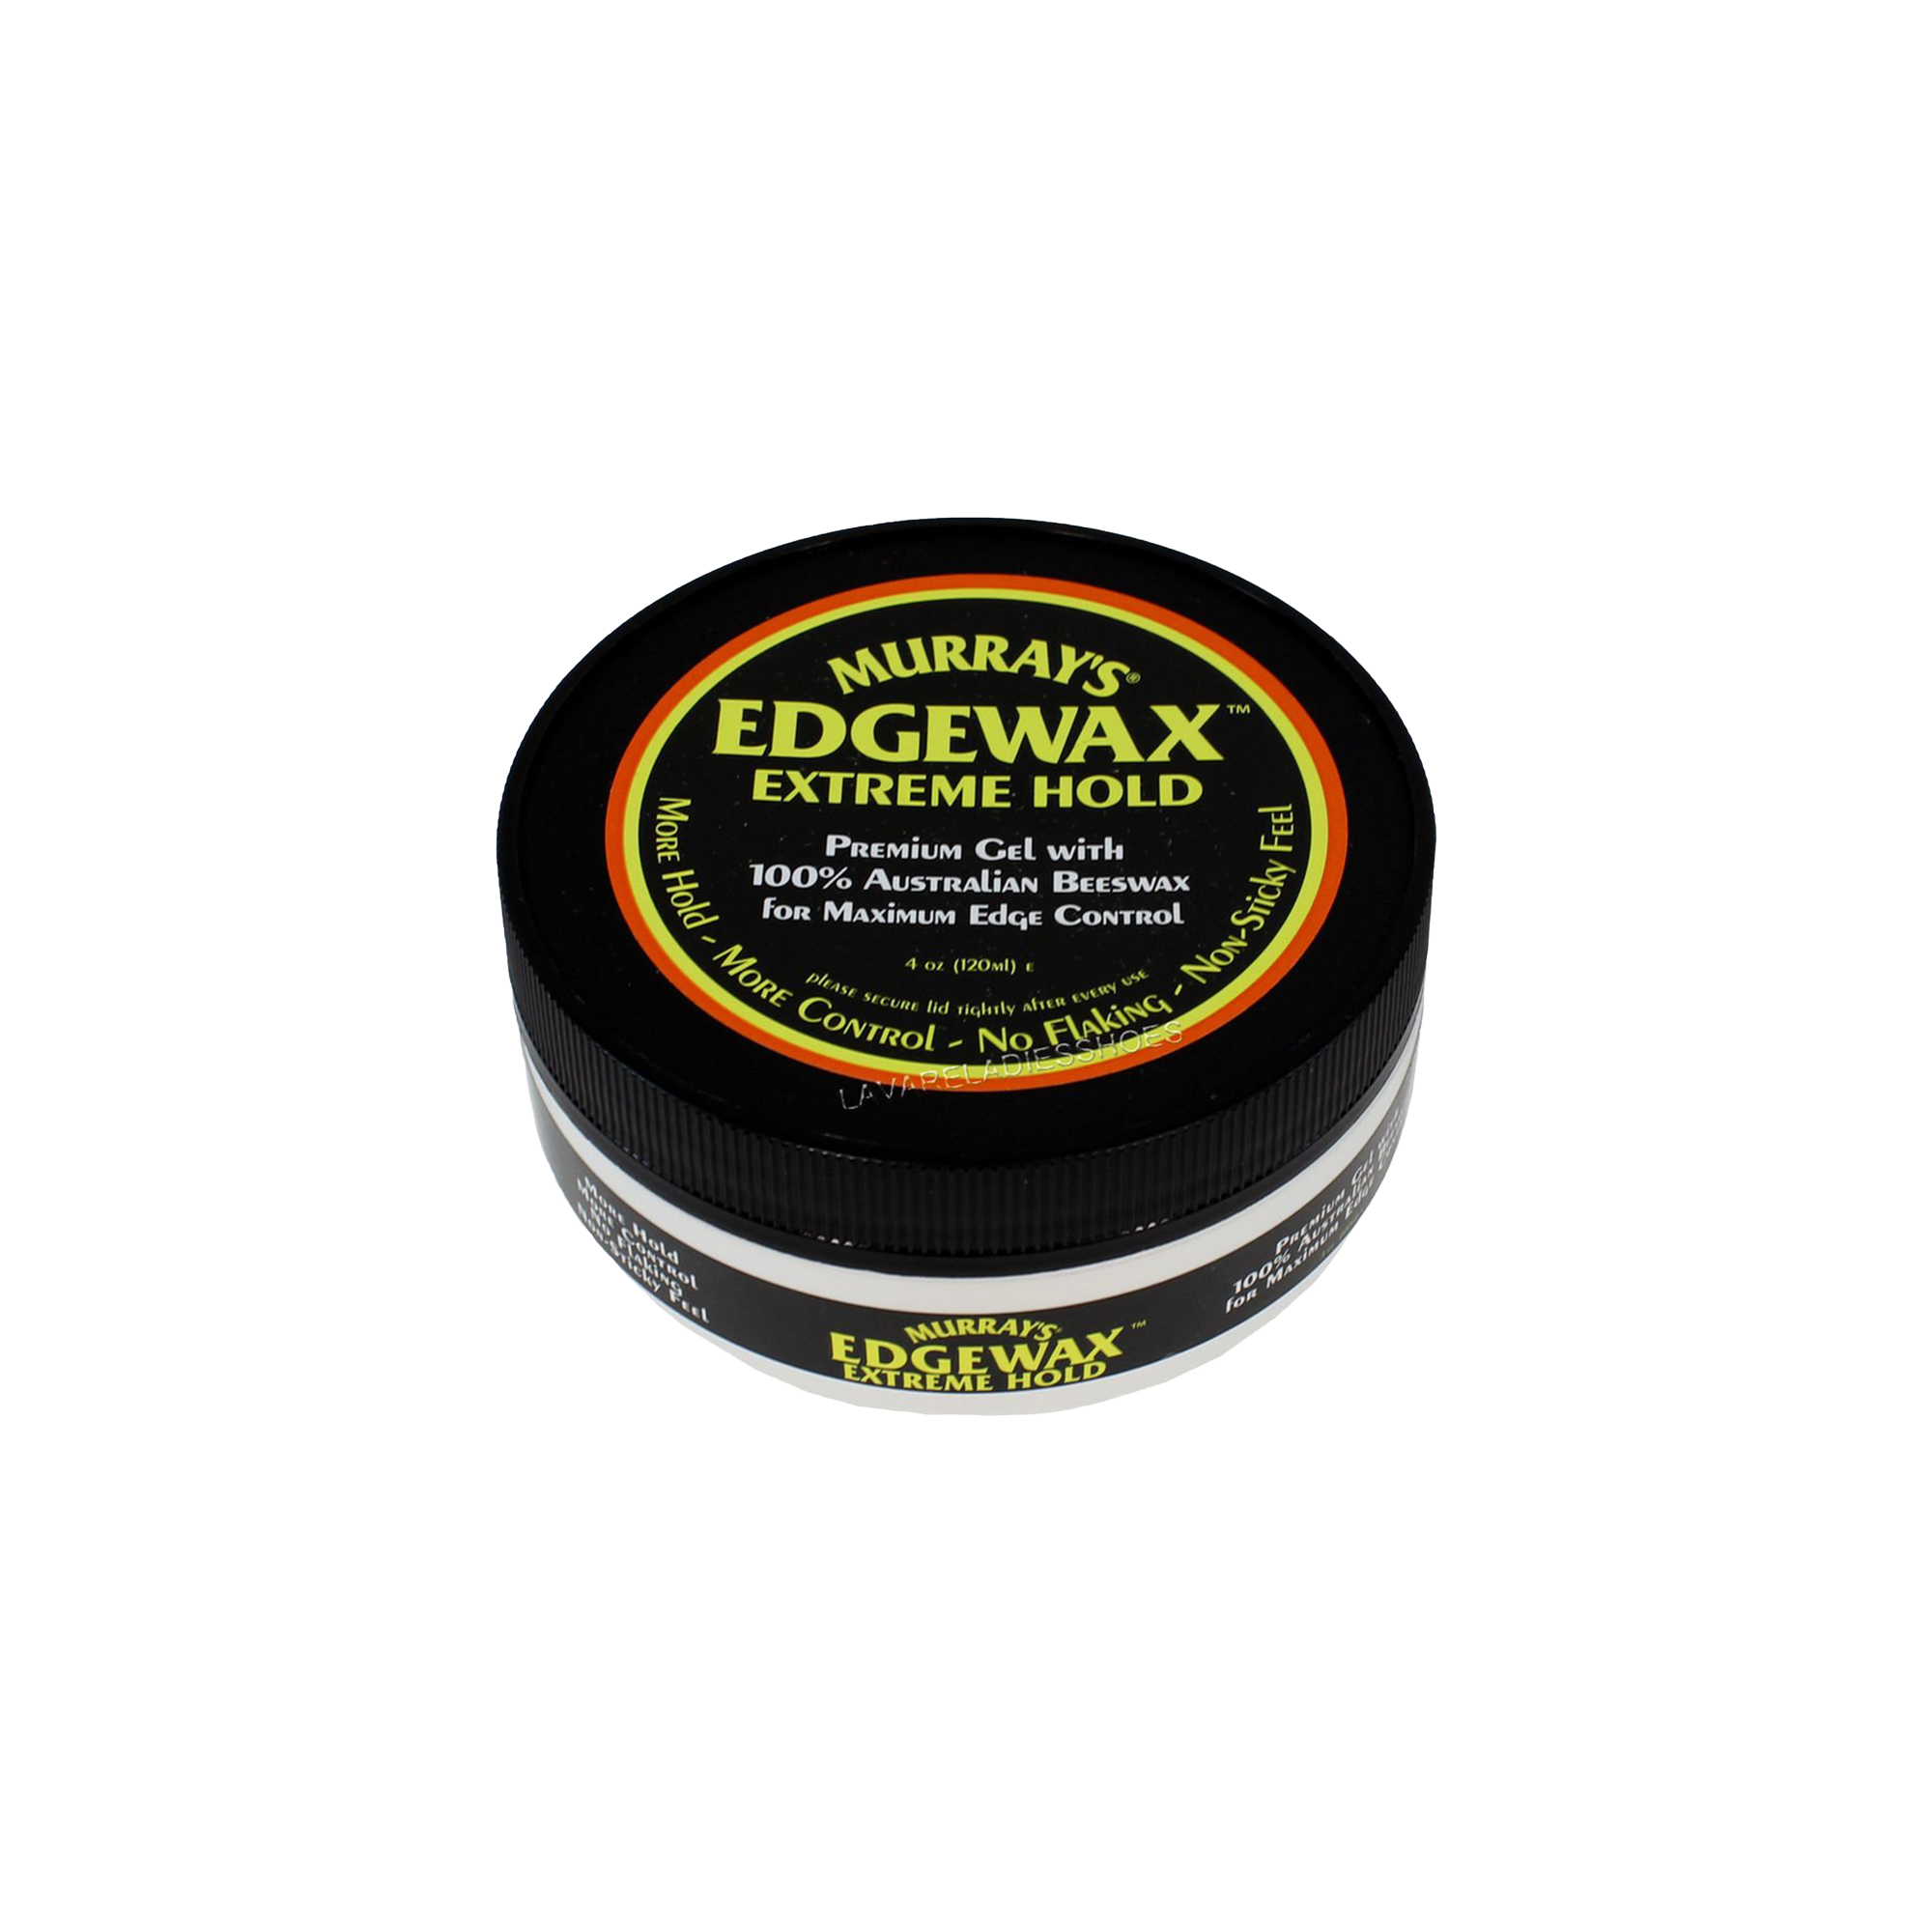  Murray's Edge Wax Extreme Hold, 4 Ounce (952881_SML) : Beauty  & Personal Care